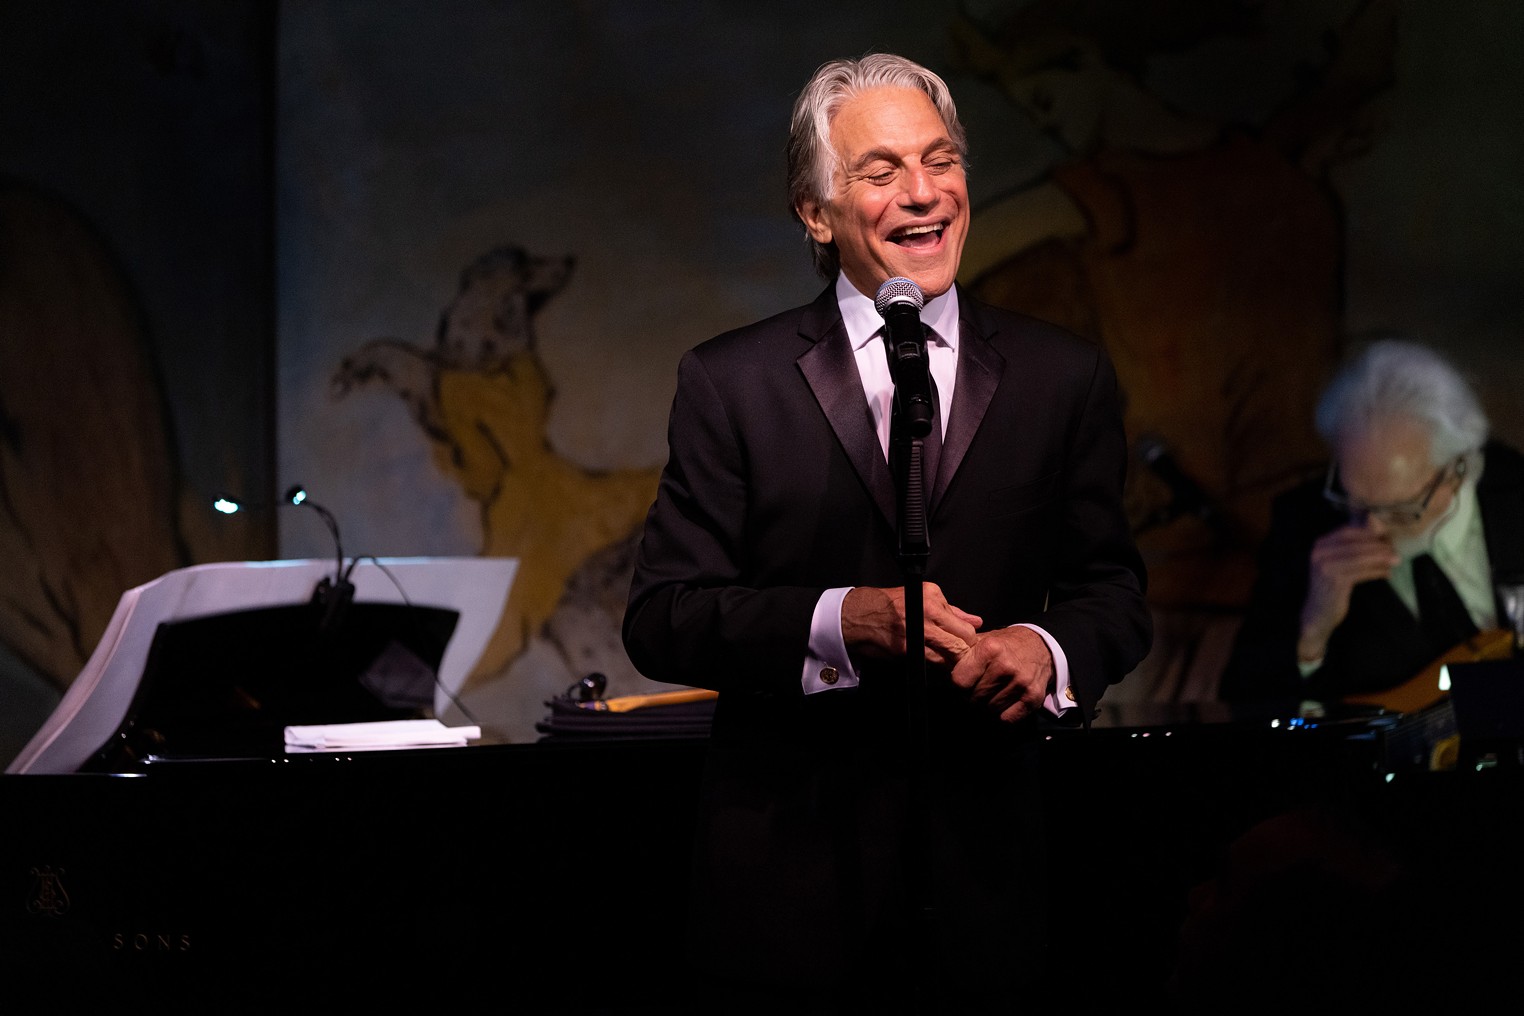 We Learned Tony Danza Is in on the Joke With Elton, and More, Ahead of His Greenville Show